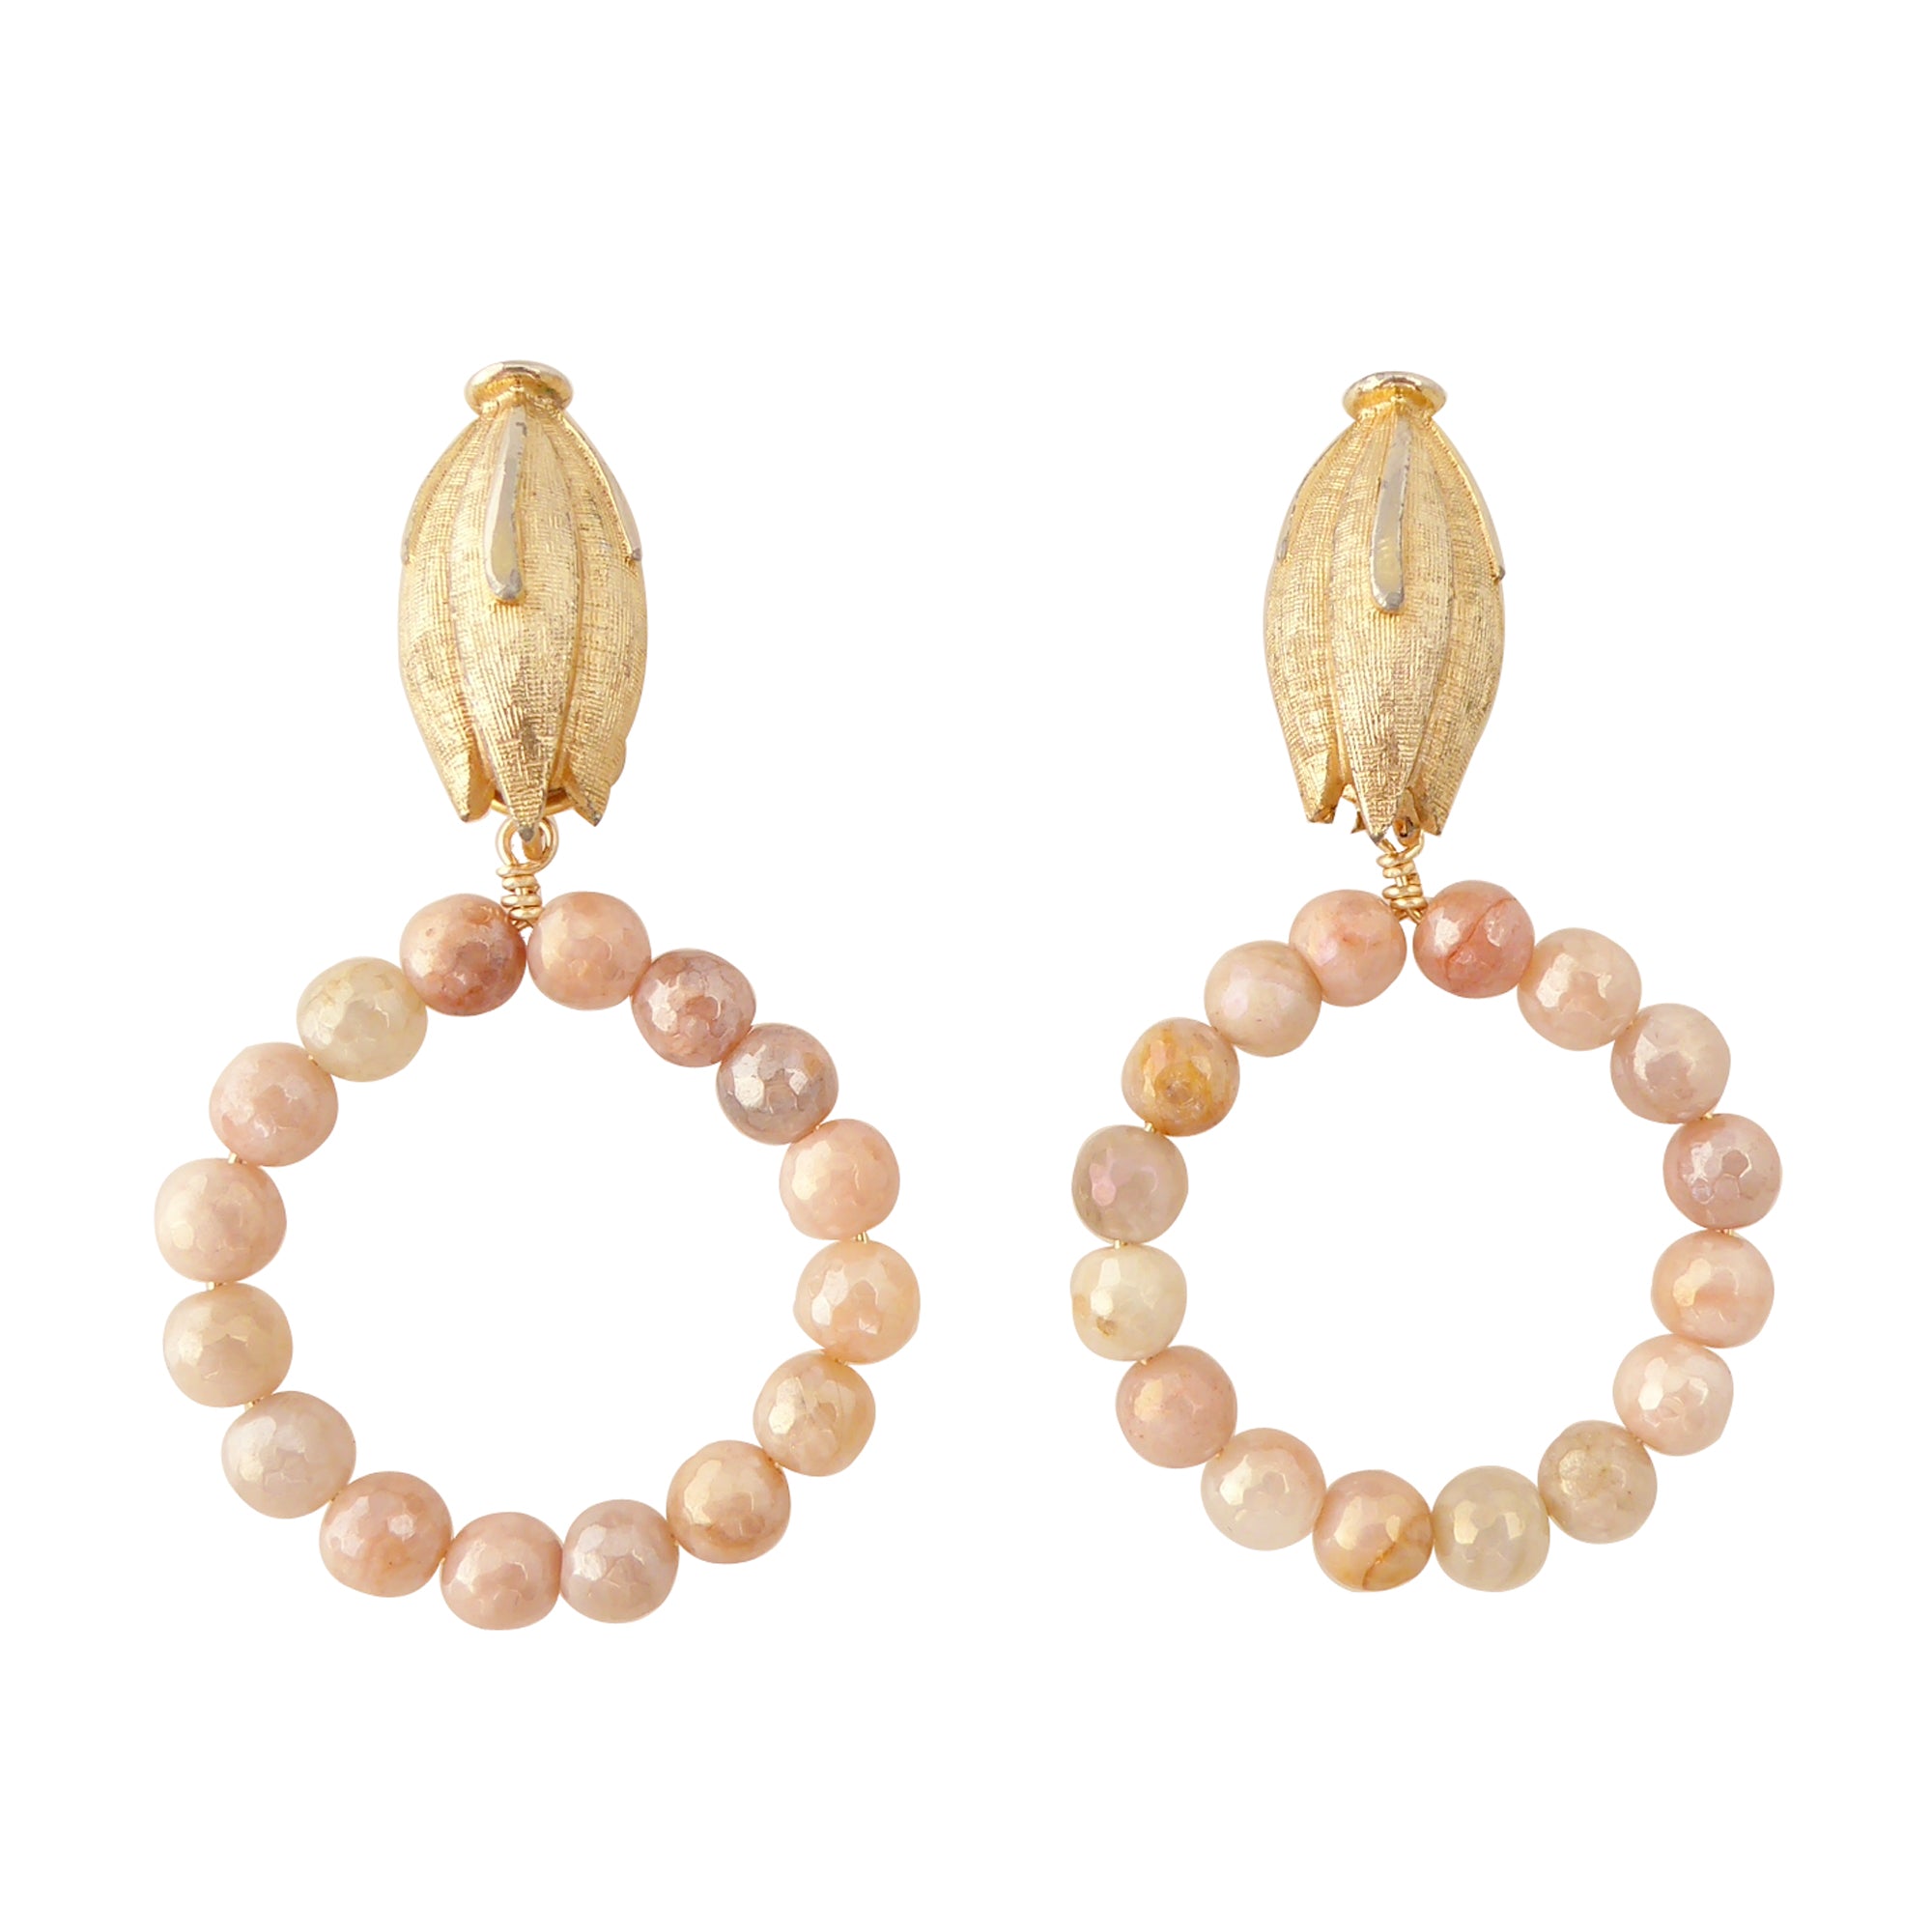 Iridescent peach moonstone earrings by Jenny Dayco 1